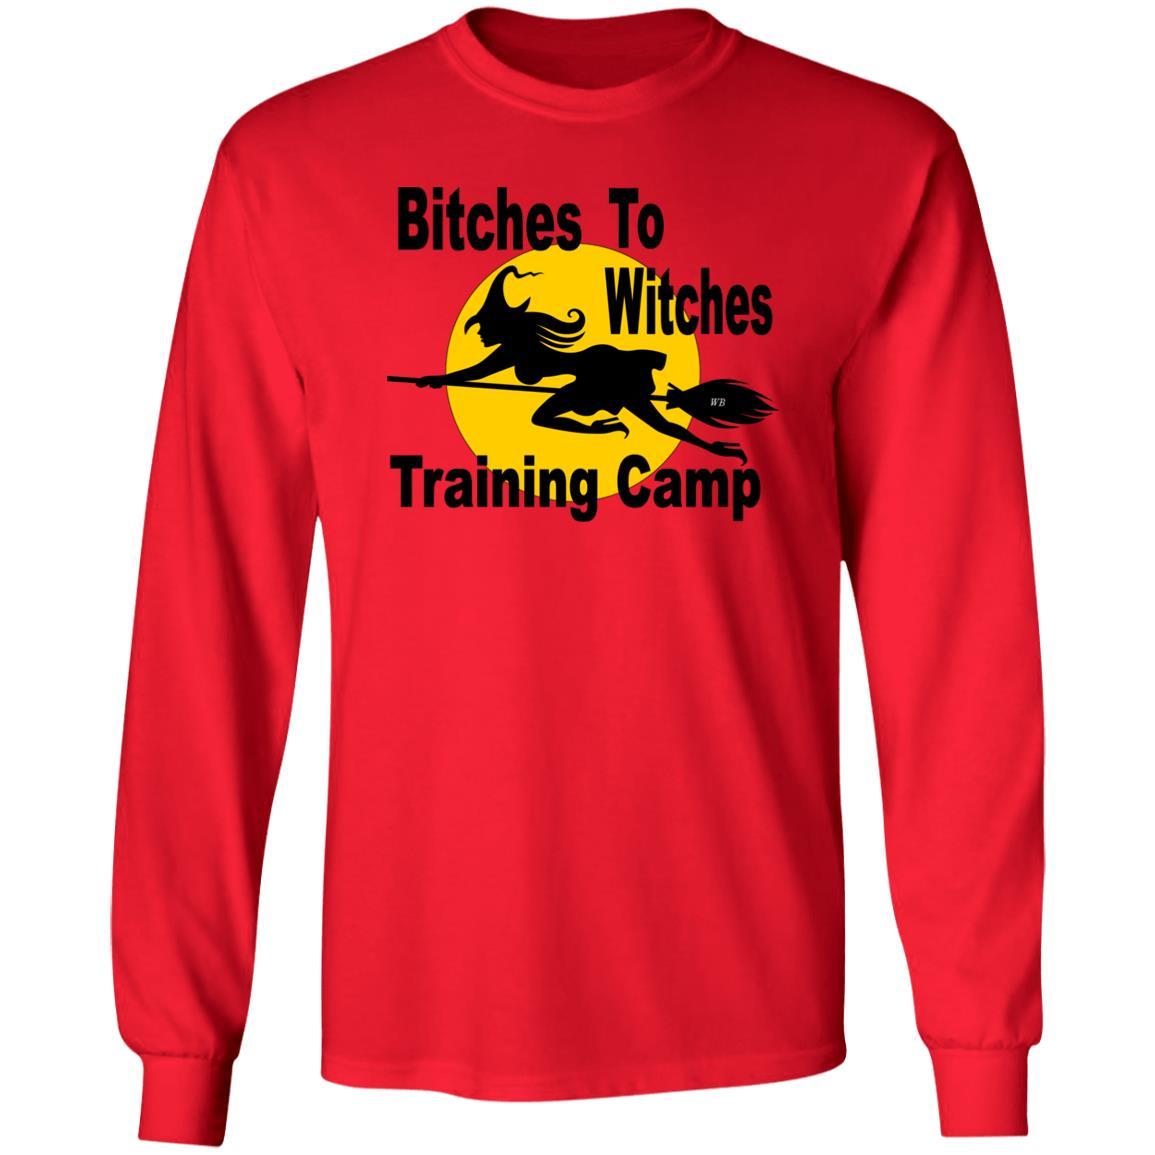 T-Shirts Red / S WineyBitches.Co "Bitches To Witches Training Camp" LS Ultra Cotton T-Shirt WineyBitchesCo